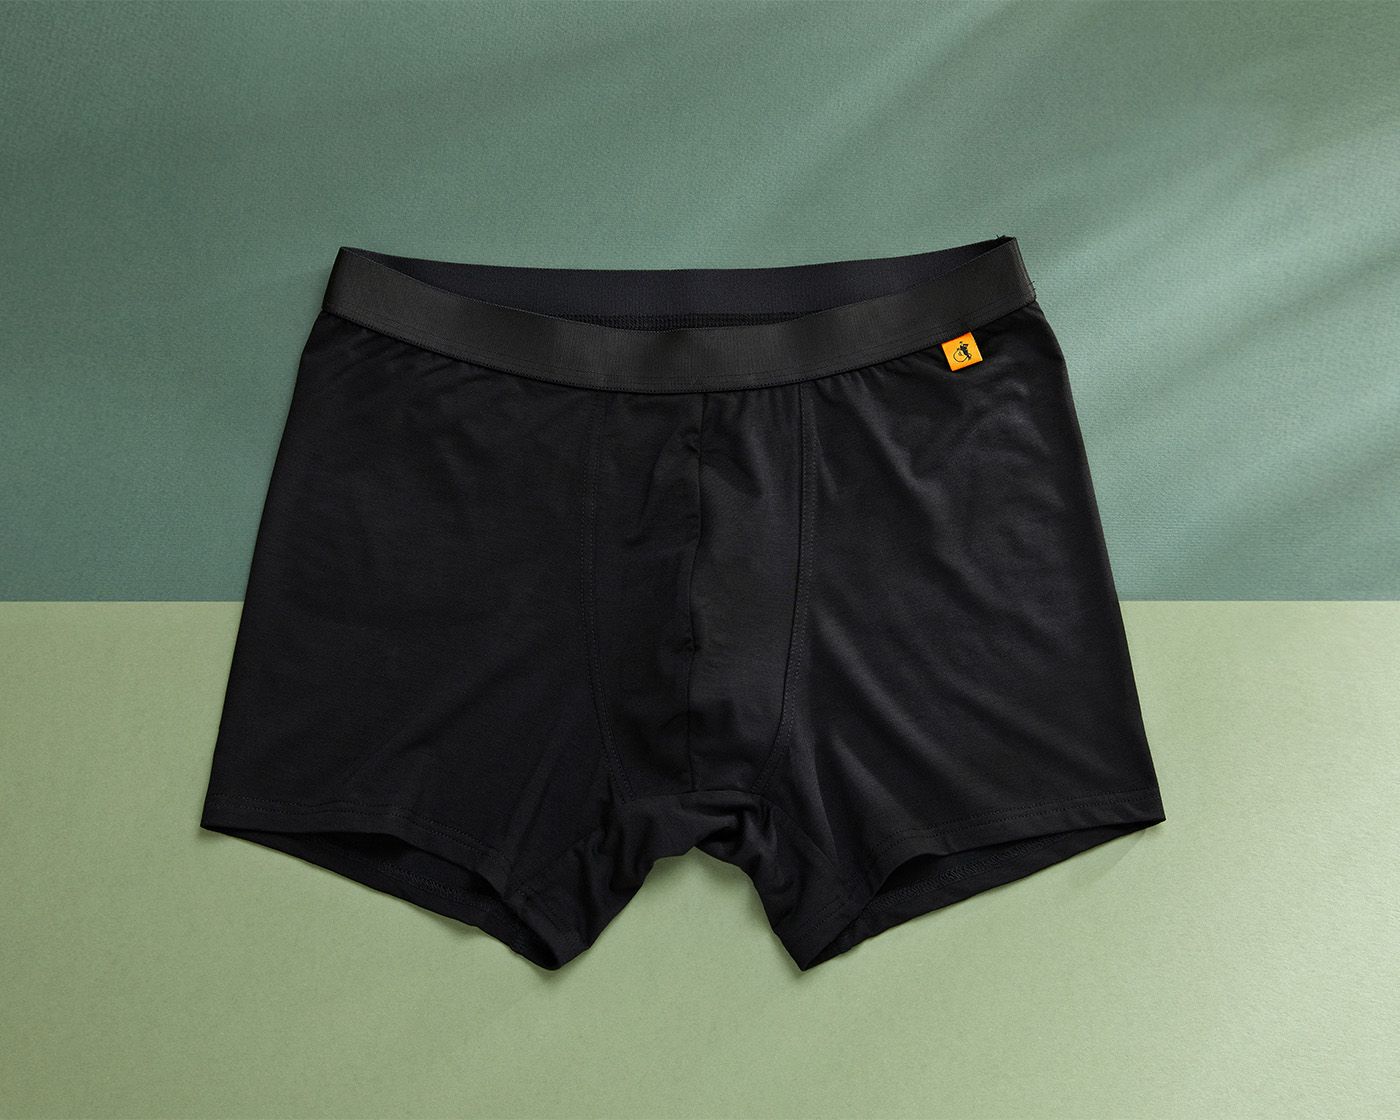 What is the best fabric for boxer shorts?